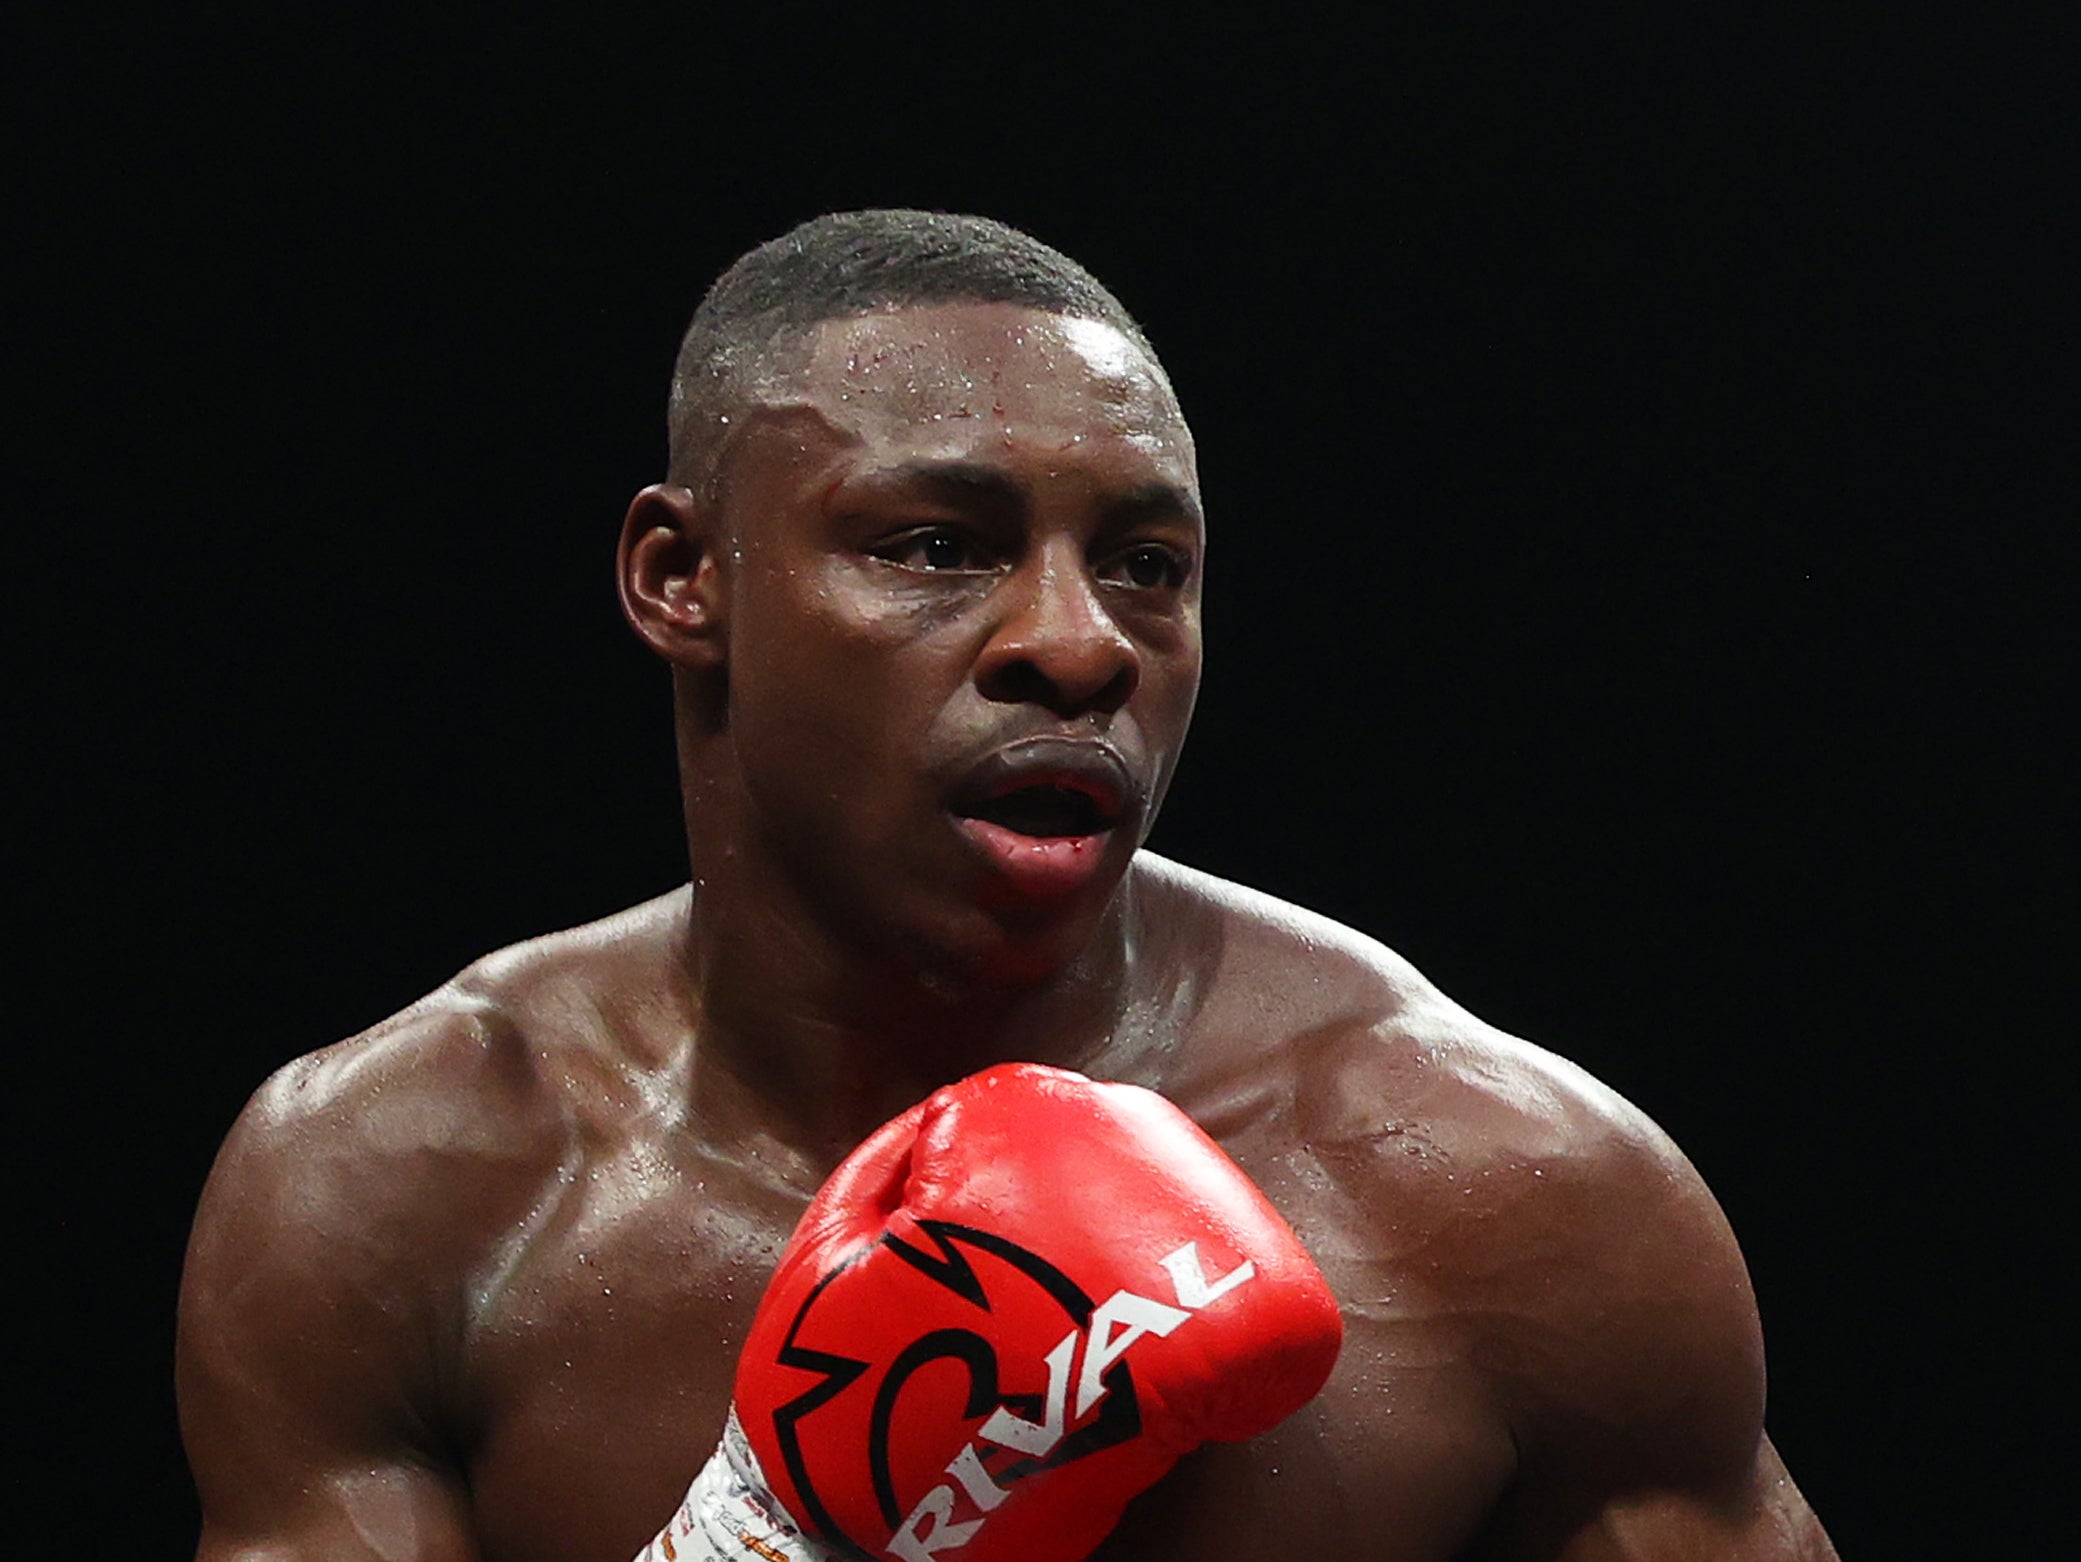 Britain’s Dan Azeez stayed unbeaten with his win over Frenchman Thomas Faure in Paris